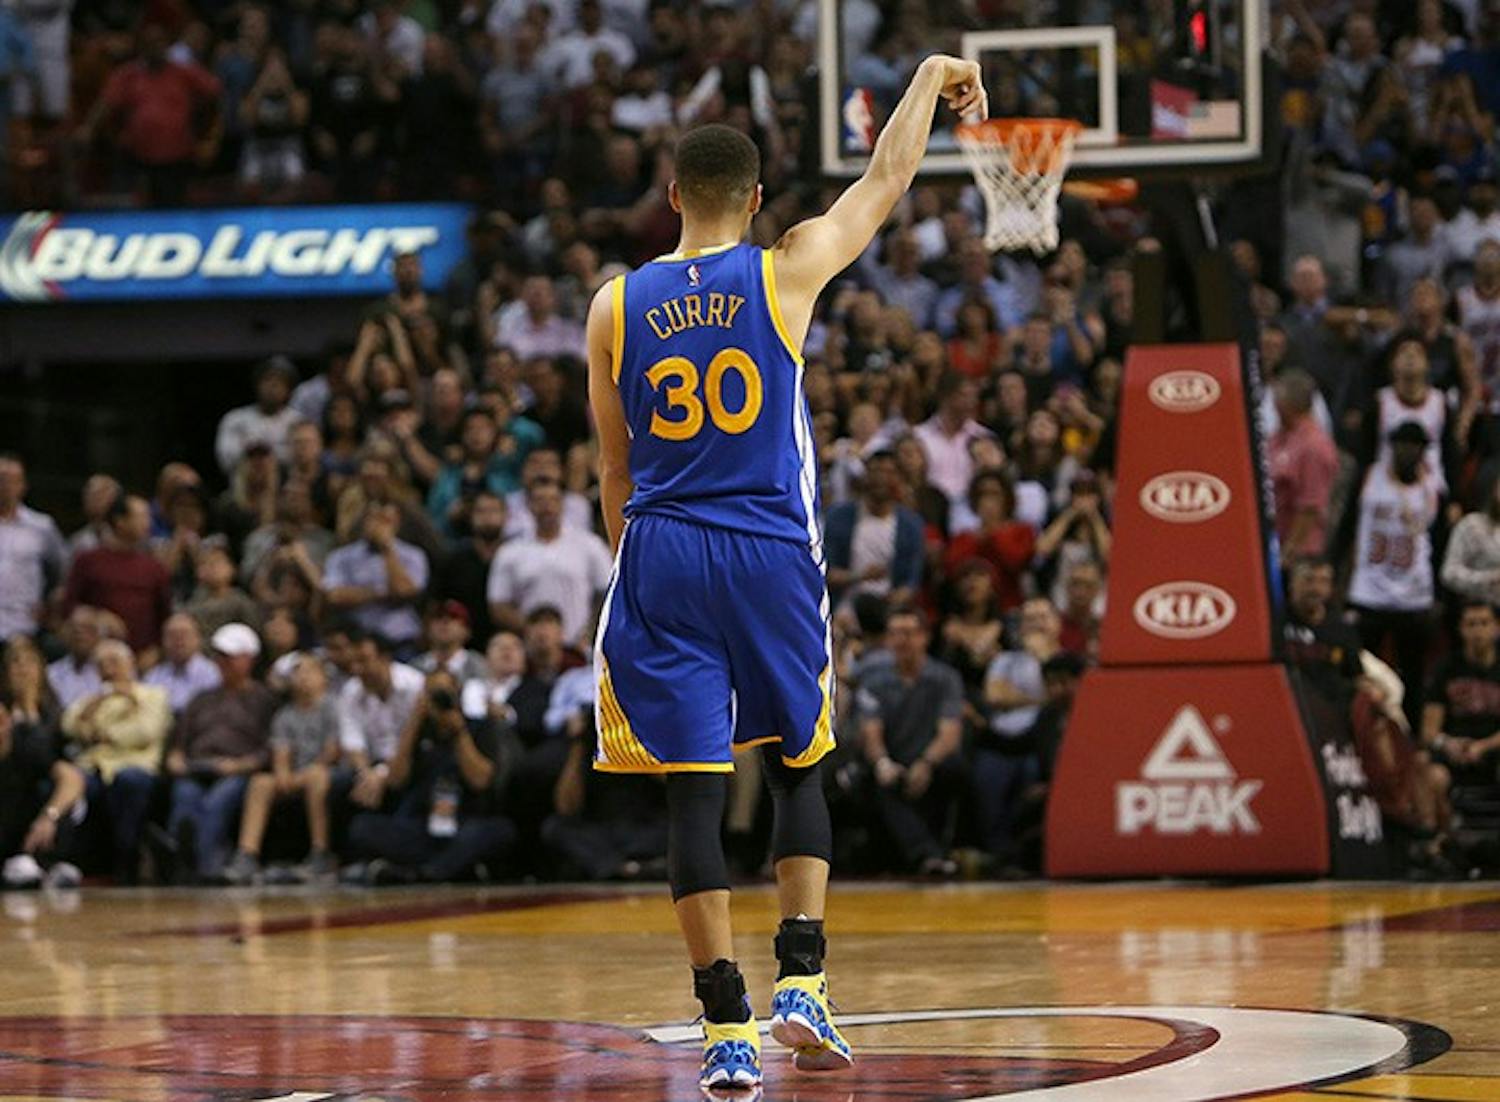 The Golden State Warriors&apos; Stephen Curry reacts after hitting a 3-pointer against the Miami Heat during the fourth quarter at the AmericanAirlines Arena in Miami on Wednesday, Feb. 24, 2016. The Warriors won, 118-112. (David Santiago/Miami Herald/TNS)